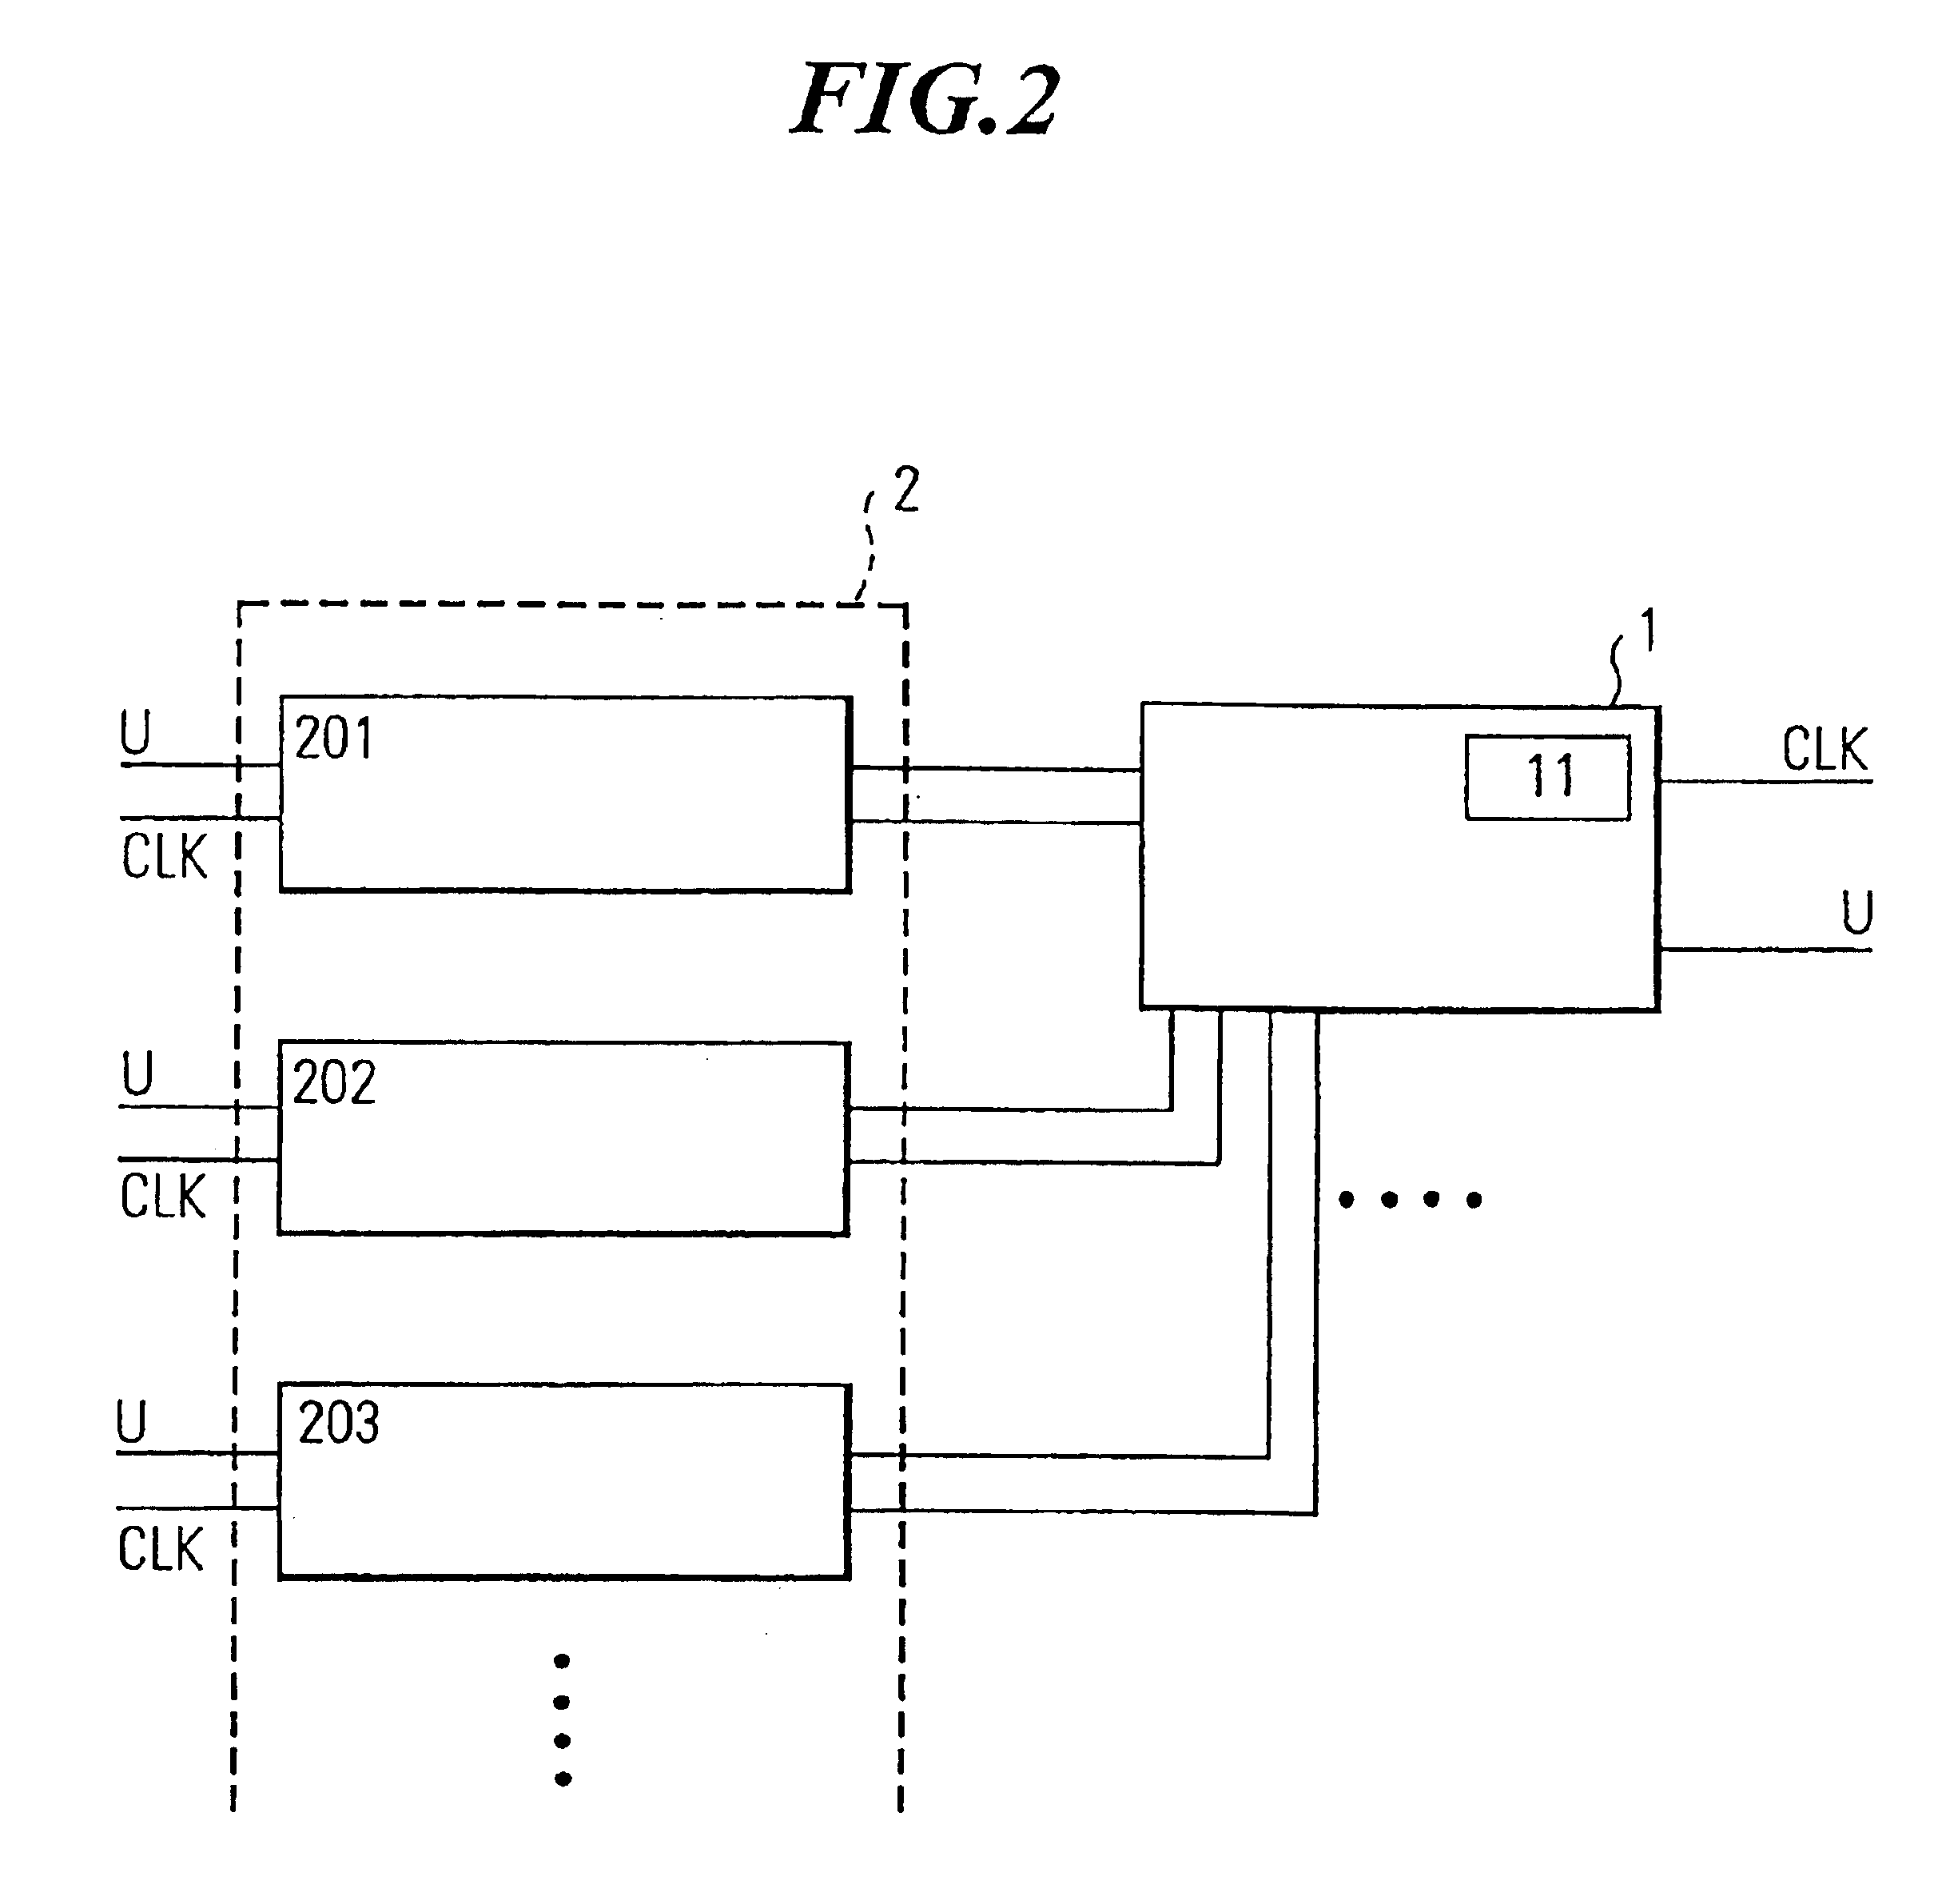 System and method for data processing by executing a security program routine initially stored in a protected part of irreversibly blocked memory upon start-up